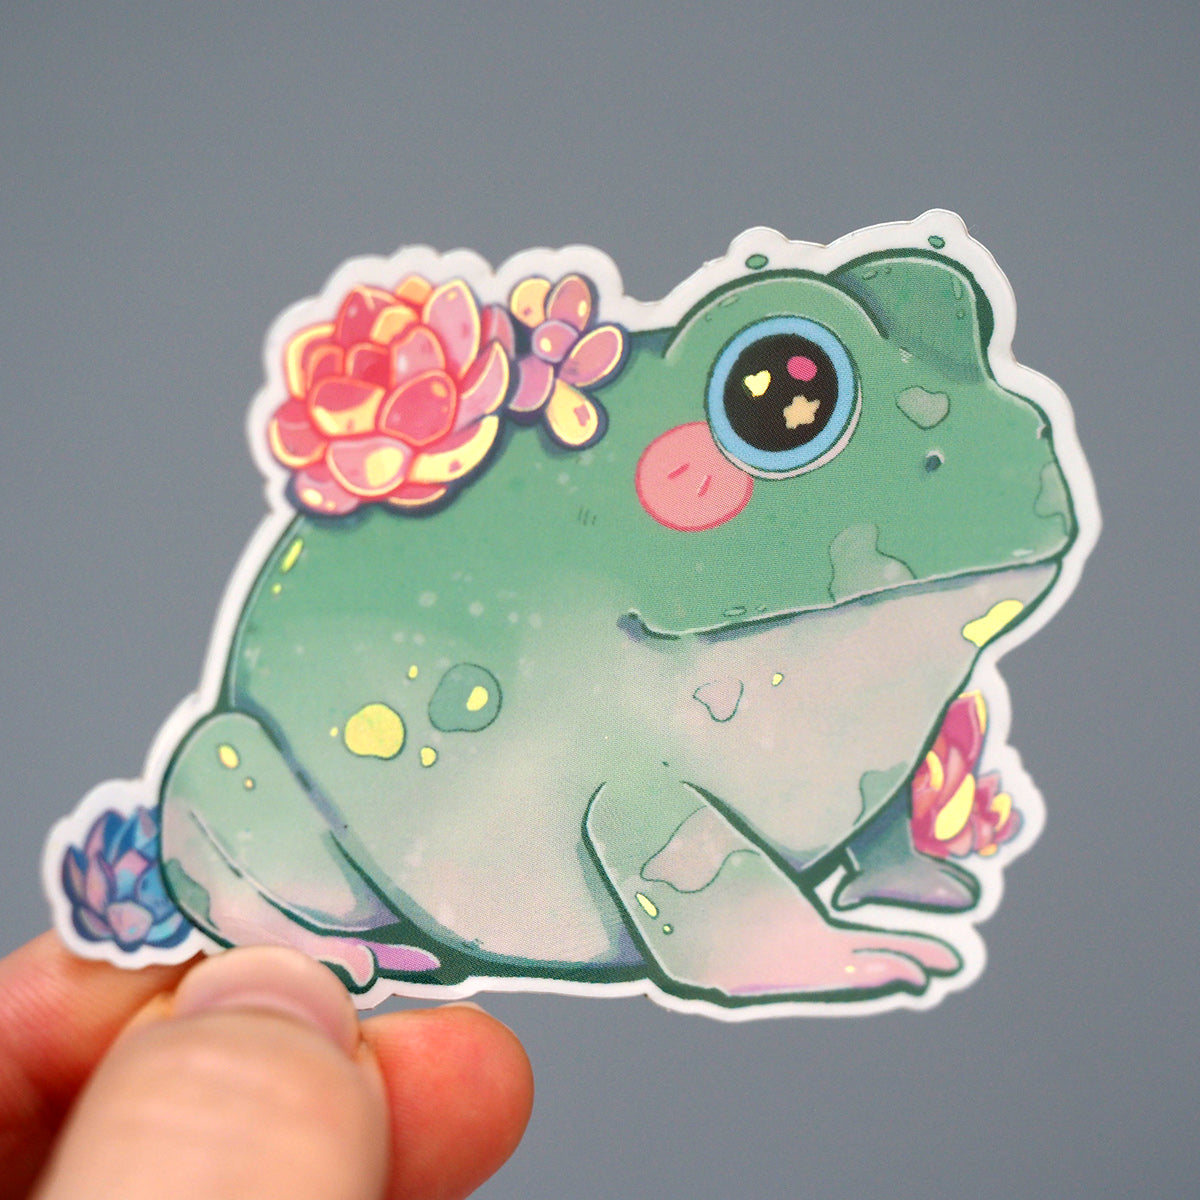 Frog Stickers by Recollections™